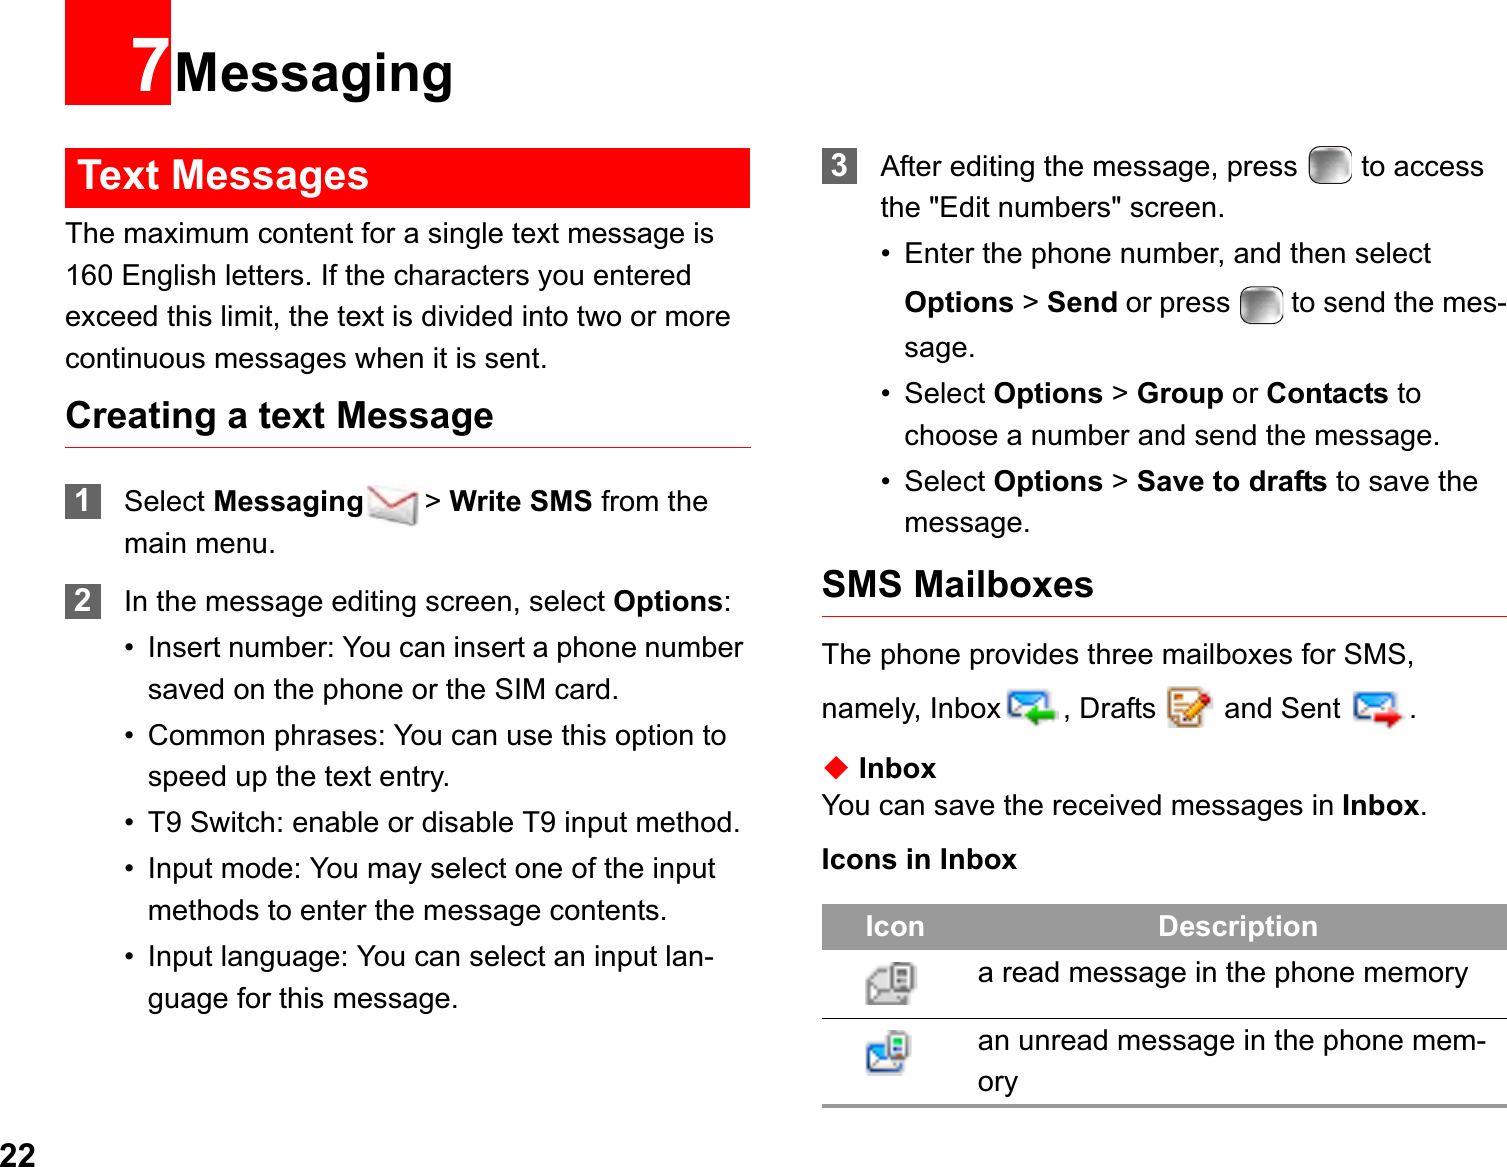 227MessagingText MessagesThe maximum content for a single text message is 160 English letters. If the characters you entered exceed this limit, the text is divided into two or more continuous messages when it is sent.Creating a text Message1Select Messaging &gt;Write SMS from the main menu.2In the message editing screen, select Options:• Insert number: You can insert a phone number saved on the phone or the SIM card.• Common phrases: You can use this option to speed up the text entry.• T9 Switch: enable or disable T9 input method.• Input mode: You may select one of the input methods to enter the message contents.• Input language: You can select an input lan-guage for this message.3After editing the message, press   to access the &quot;Edit numbers&quot; screen.• Enter the phone number, and then select Options &gt; Send or press   to send the mes-sage.• Select Options &gt; Group or Contacts to choose a number and send the message.• Select Options &gt; Save to drafts to save the message.SMS MailboxesThe phone provides three mailboxes for SMS, namely, Inbox , Drafts   and Sent  .ƹInboxYou can save the received messages in Inbox.Icons in InboxIcon Descriptiona read message in the phone memoryan unread message in the phone mem-ory